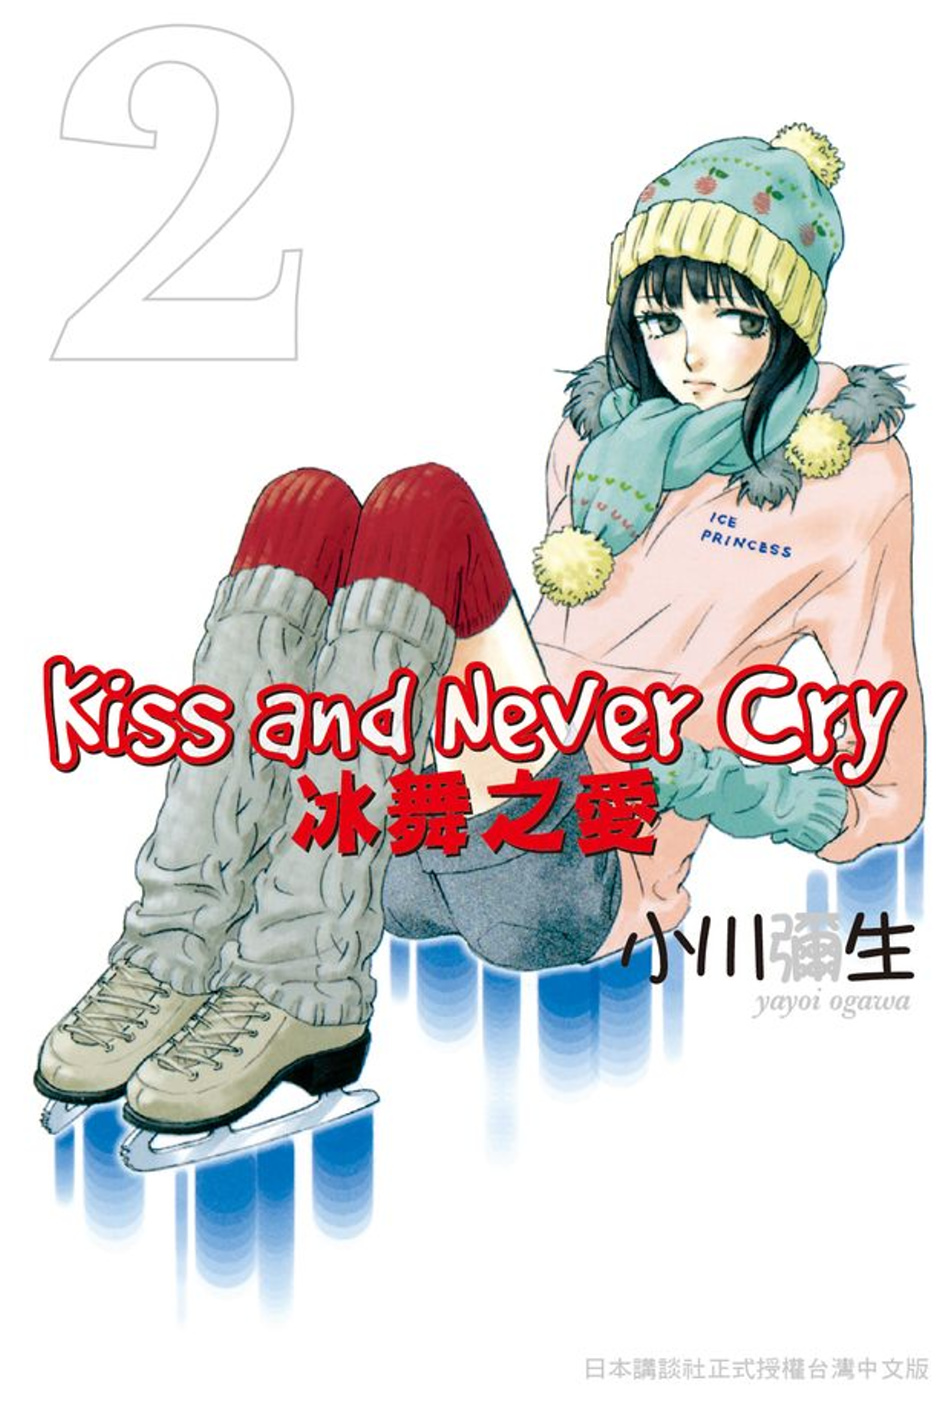 Kiss and Never Cry - 冰舞之愛 2